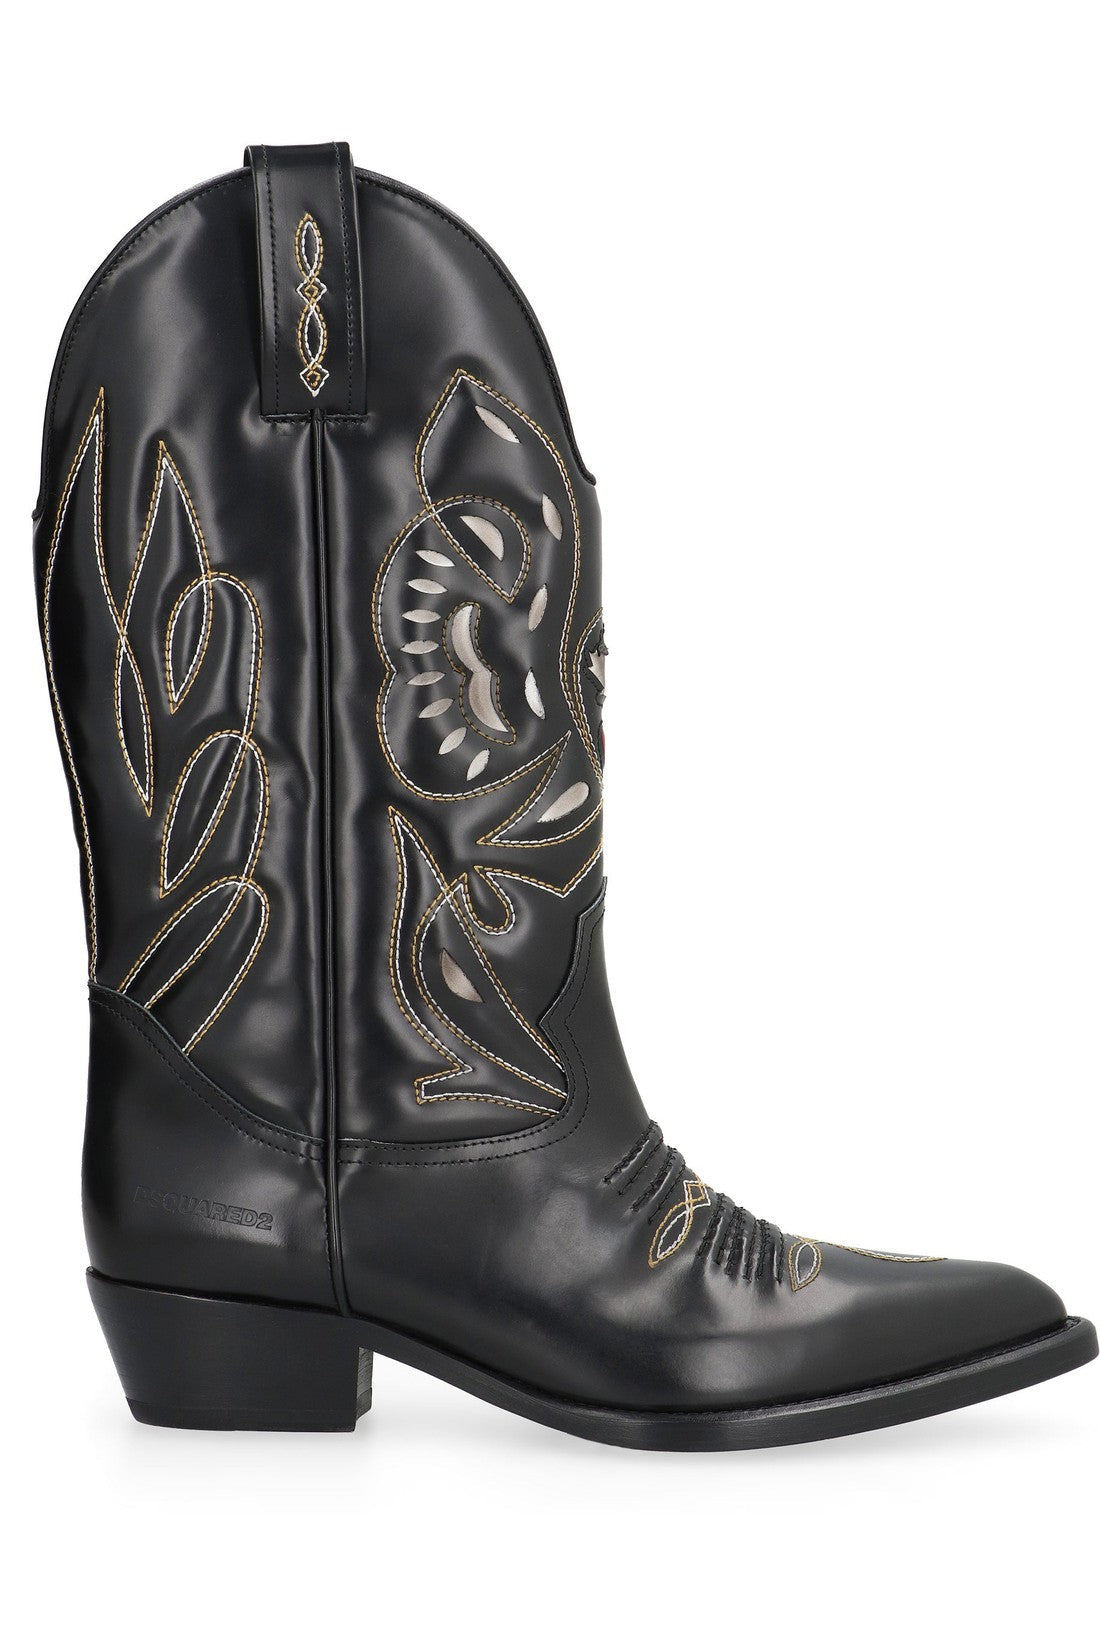 Dsquared2-OUTLET-SALE-Western-style boots-ARCHIVIST